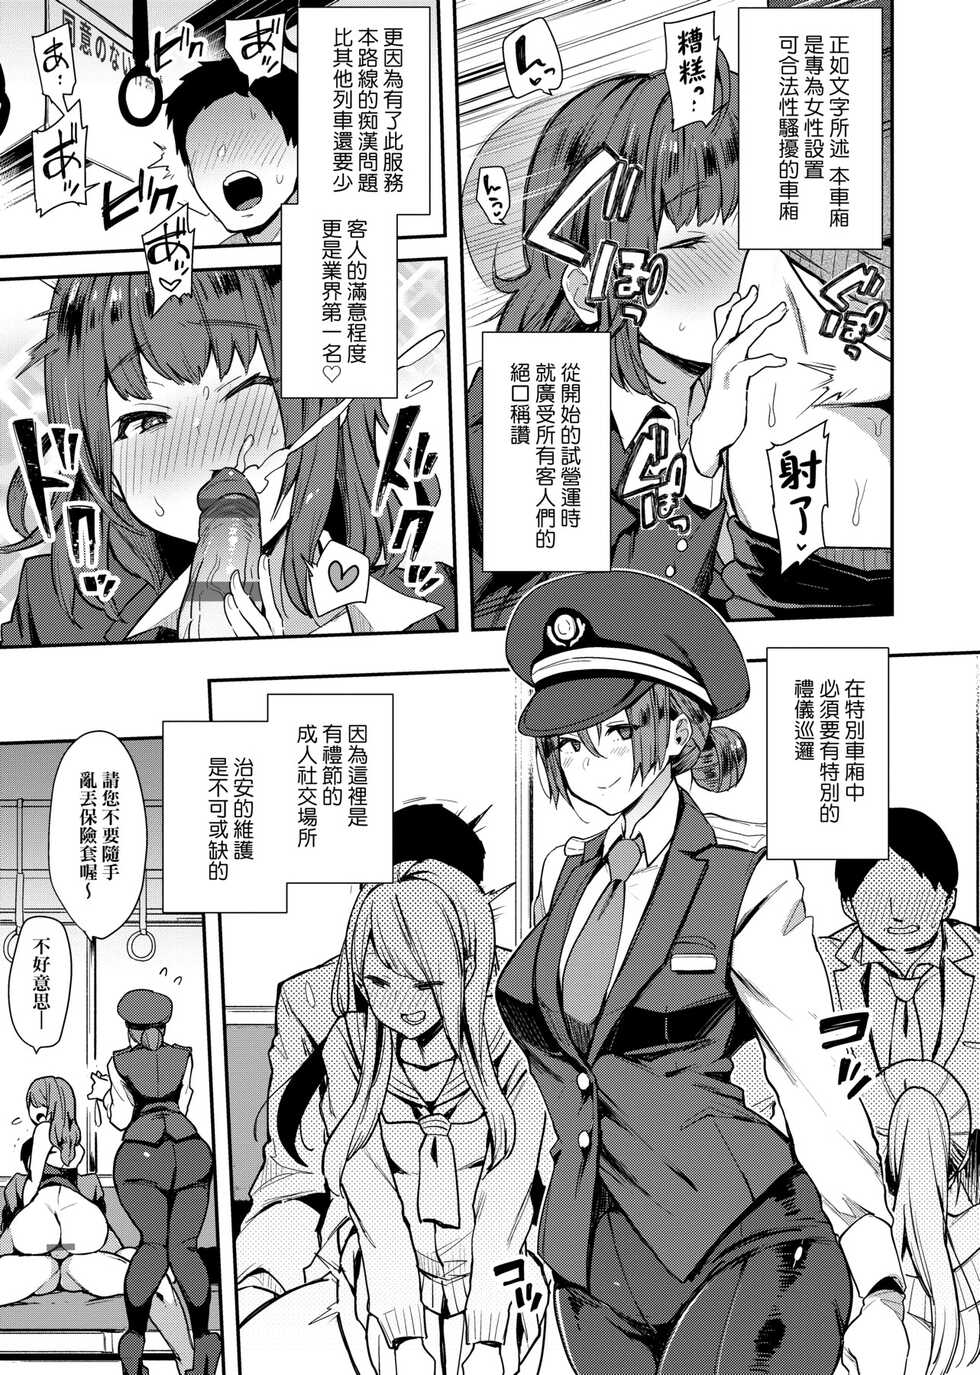 [Indo Curry] BITCH ONLY | 痴女專用車＜Bitch Only＞ 特裝版 [Chinese] [Digital] - Page 34